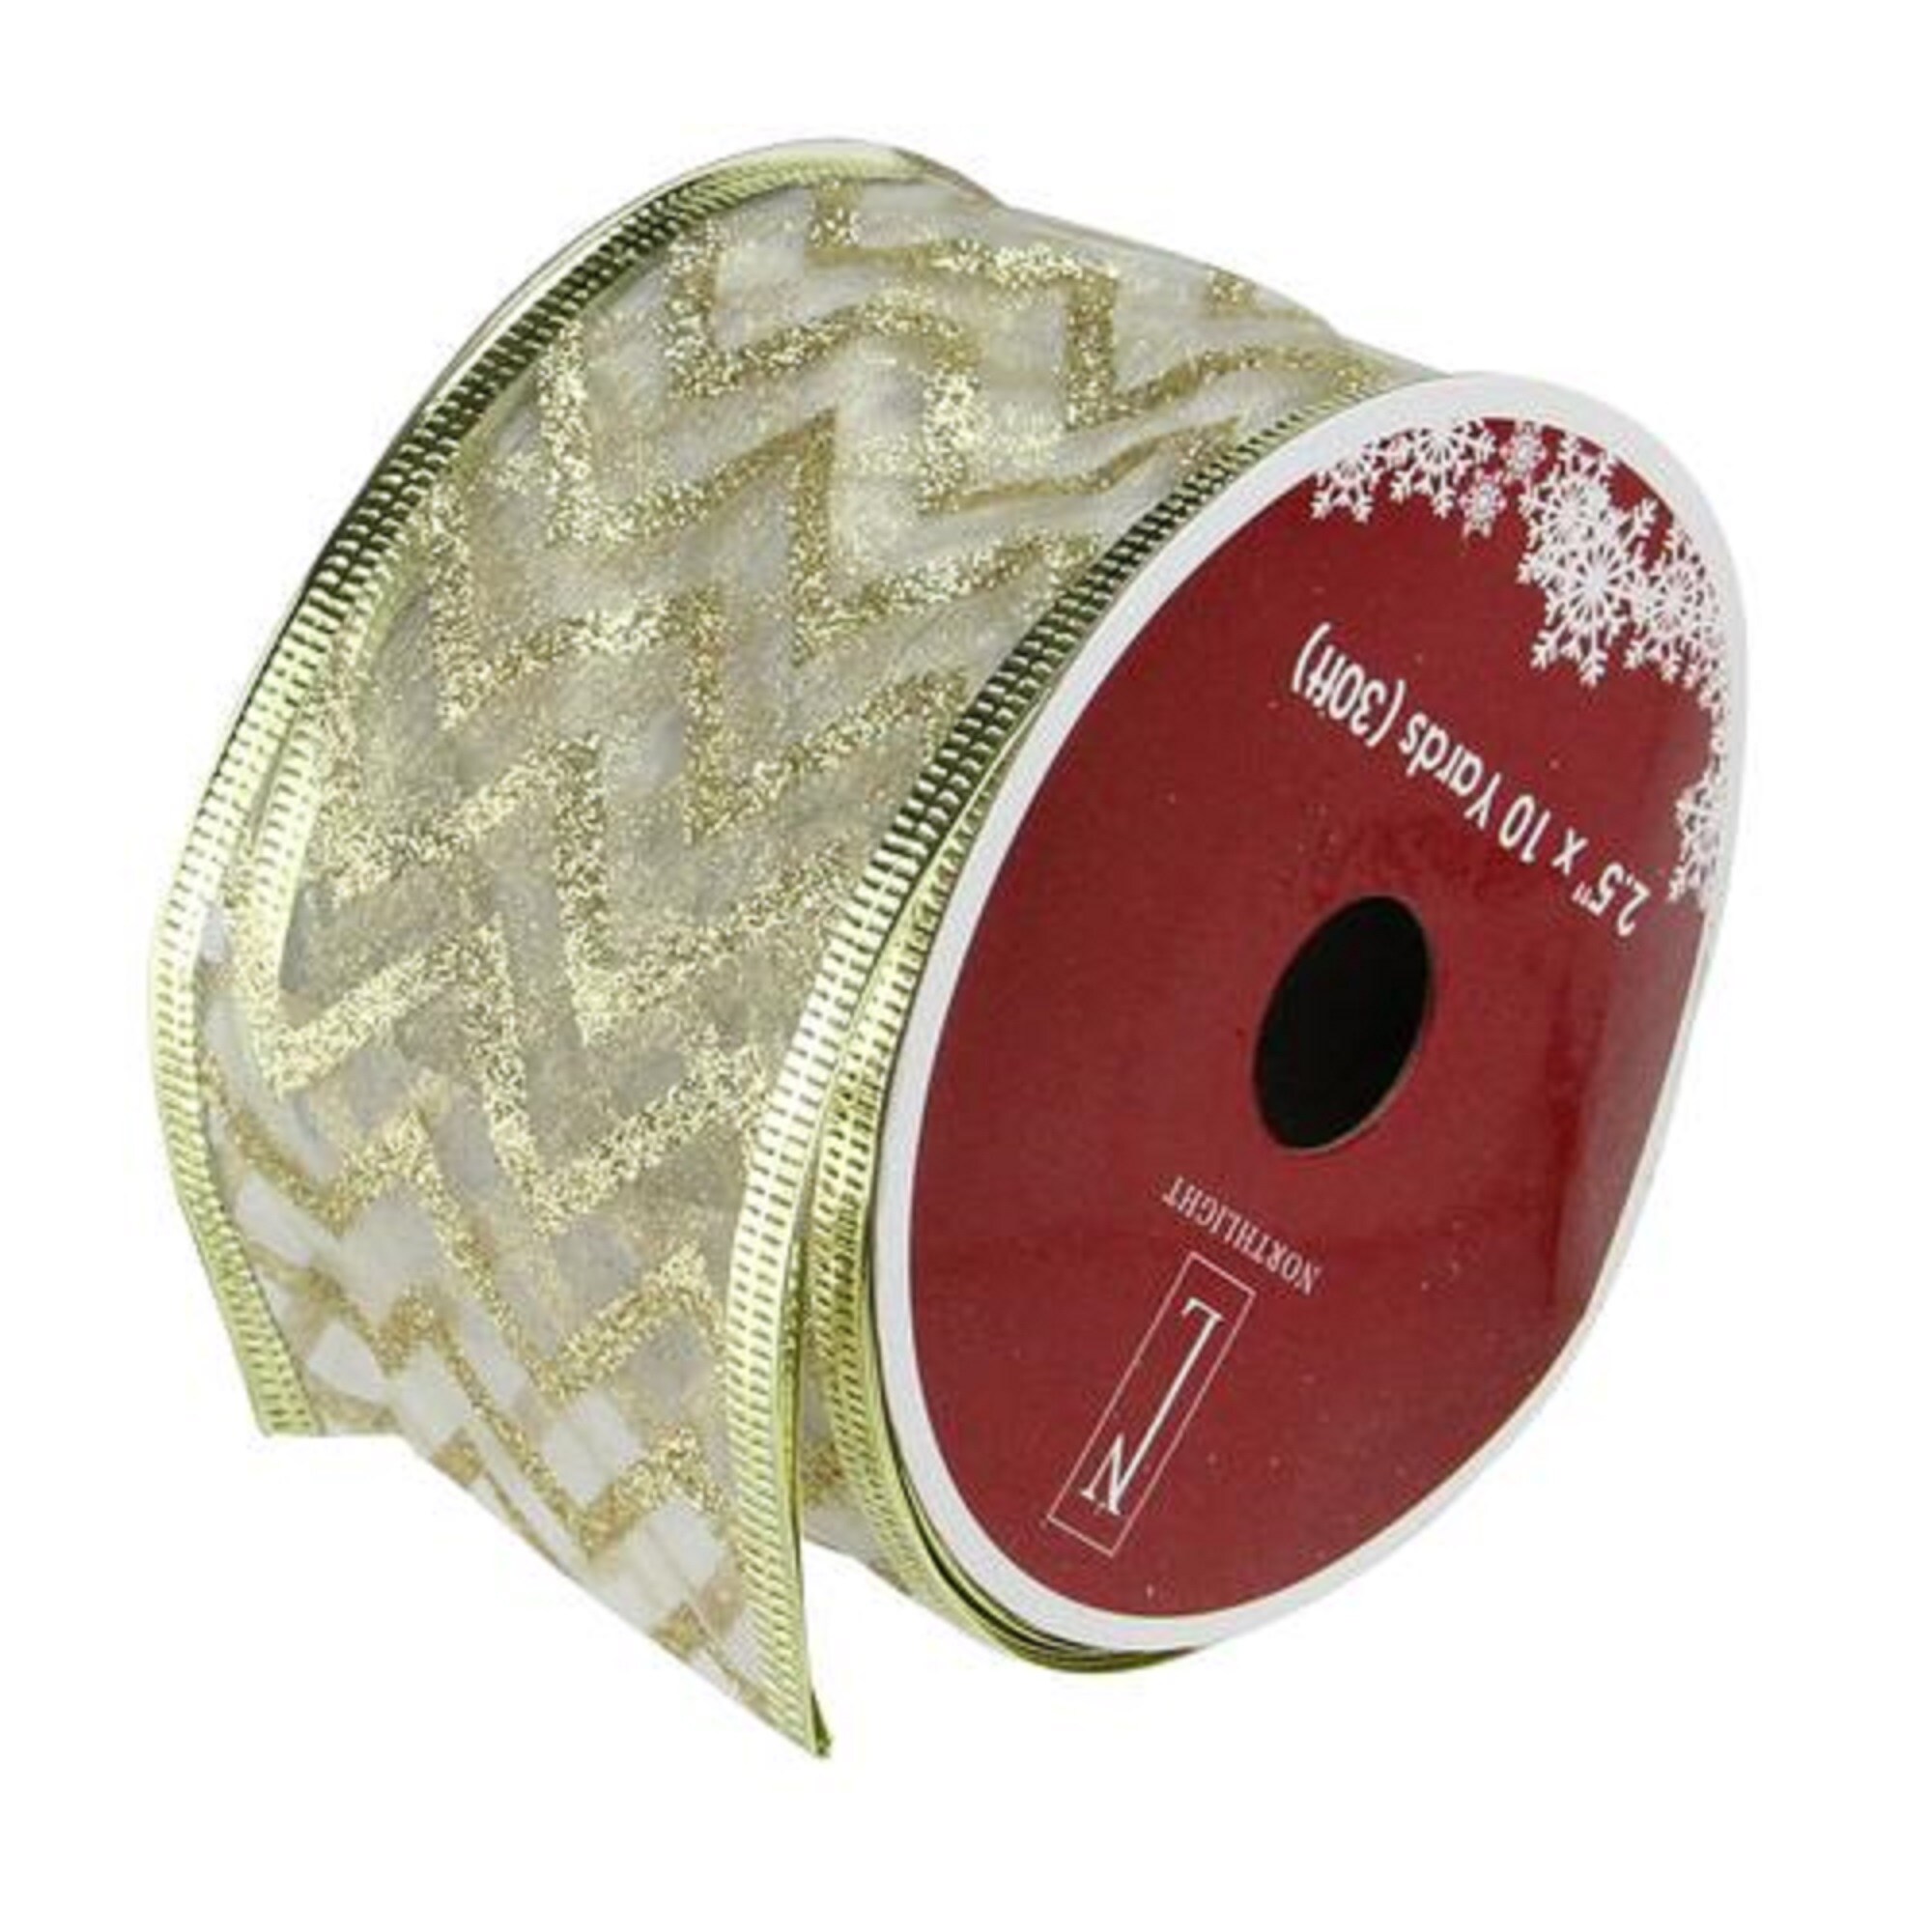 5"  10"  WIRED NATURAL SPARKLY GOLDSWIRLS CHRISTMAS RIBBON BOW WREATH TREE GIFT 